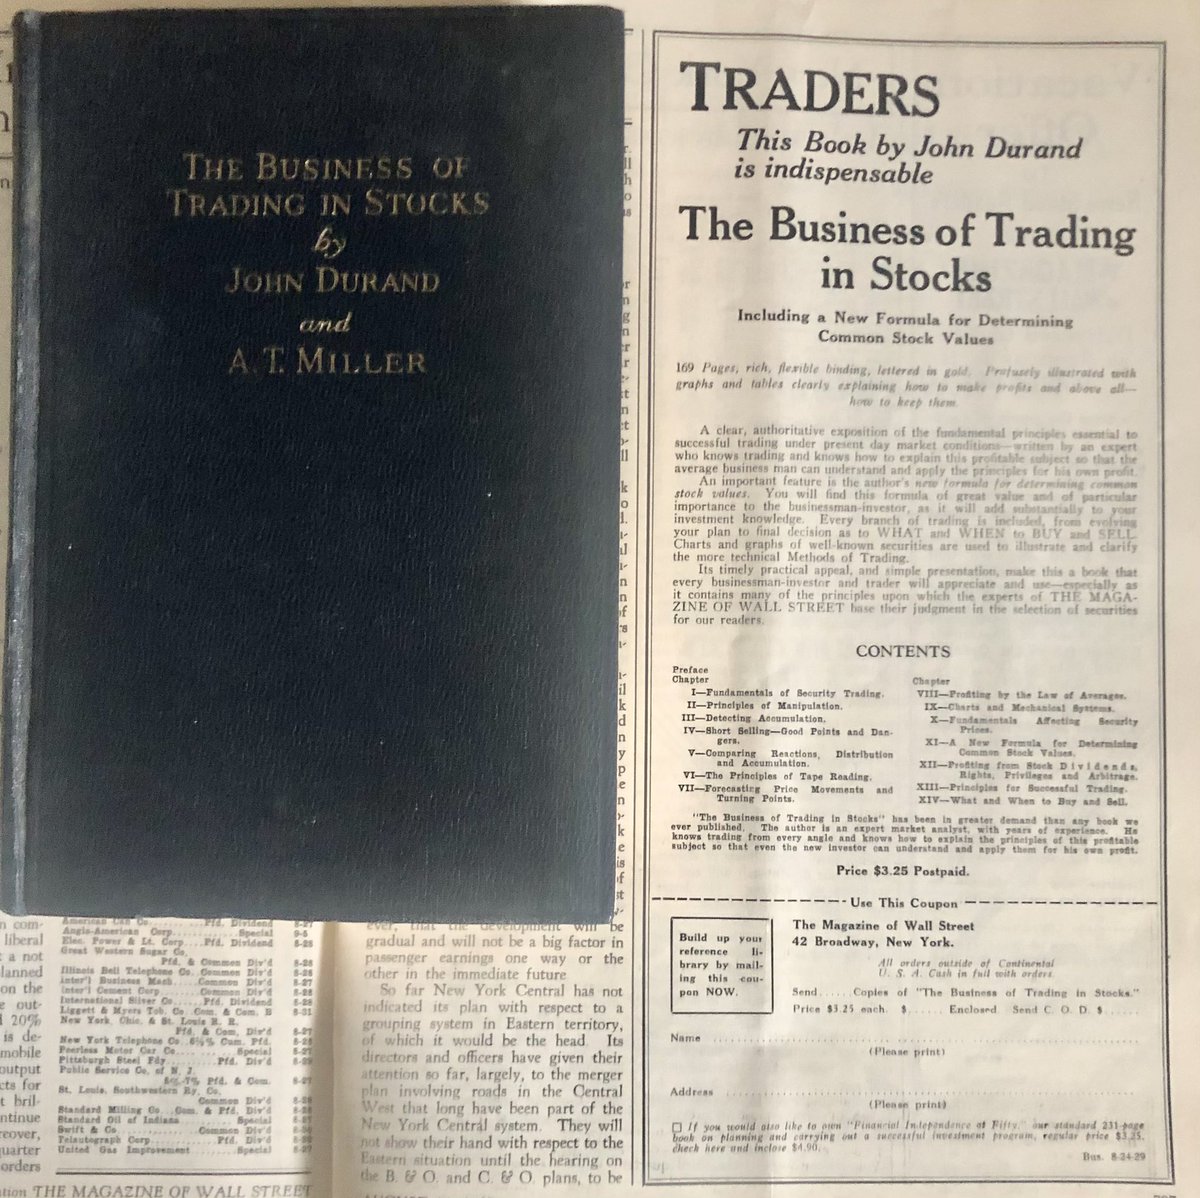 One of the books from Wyckoff’s ‘Magazine of Wall Street’ and it’s ad in the 8/24/29 edition one week before the market peaked.